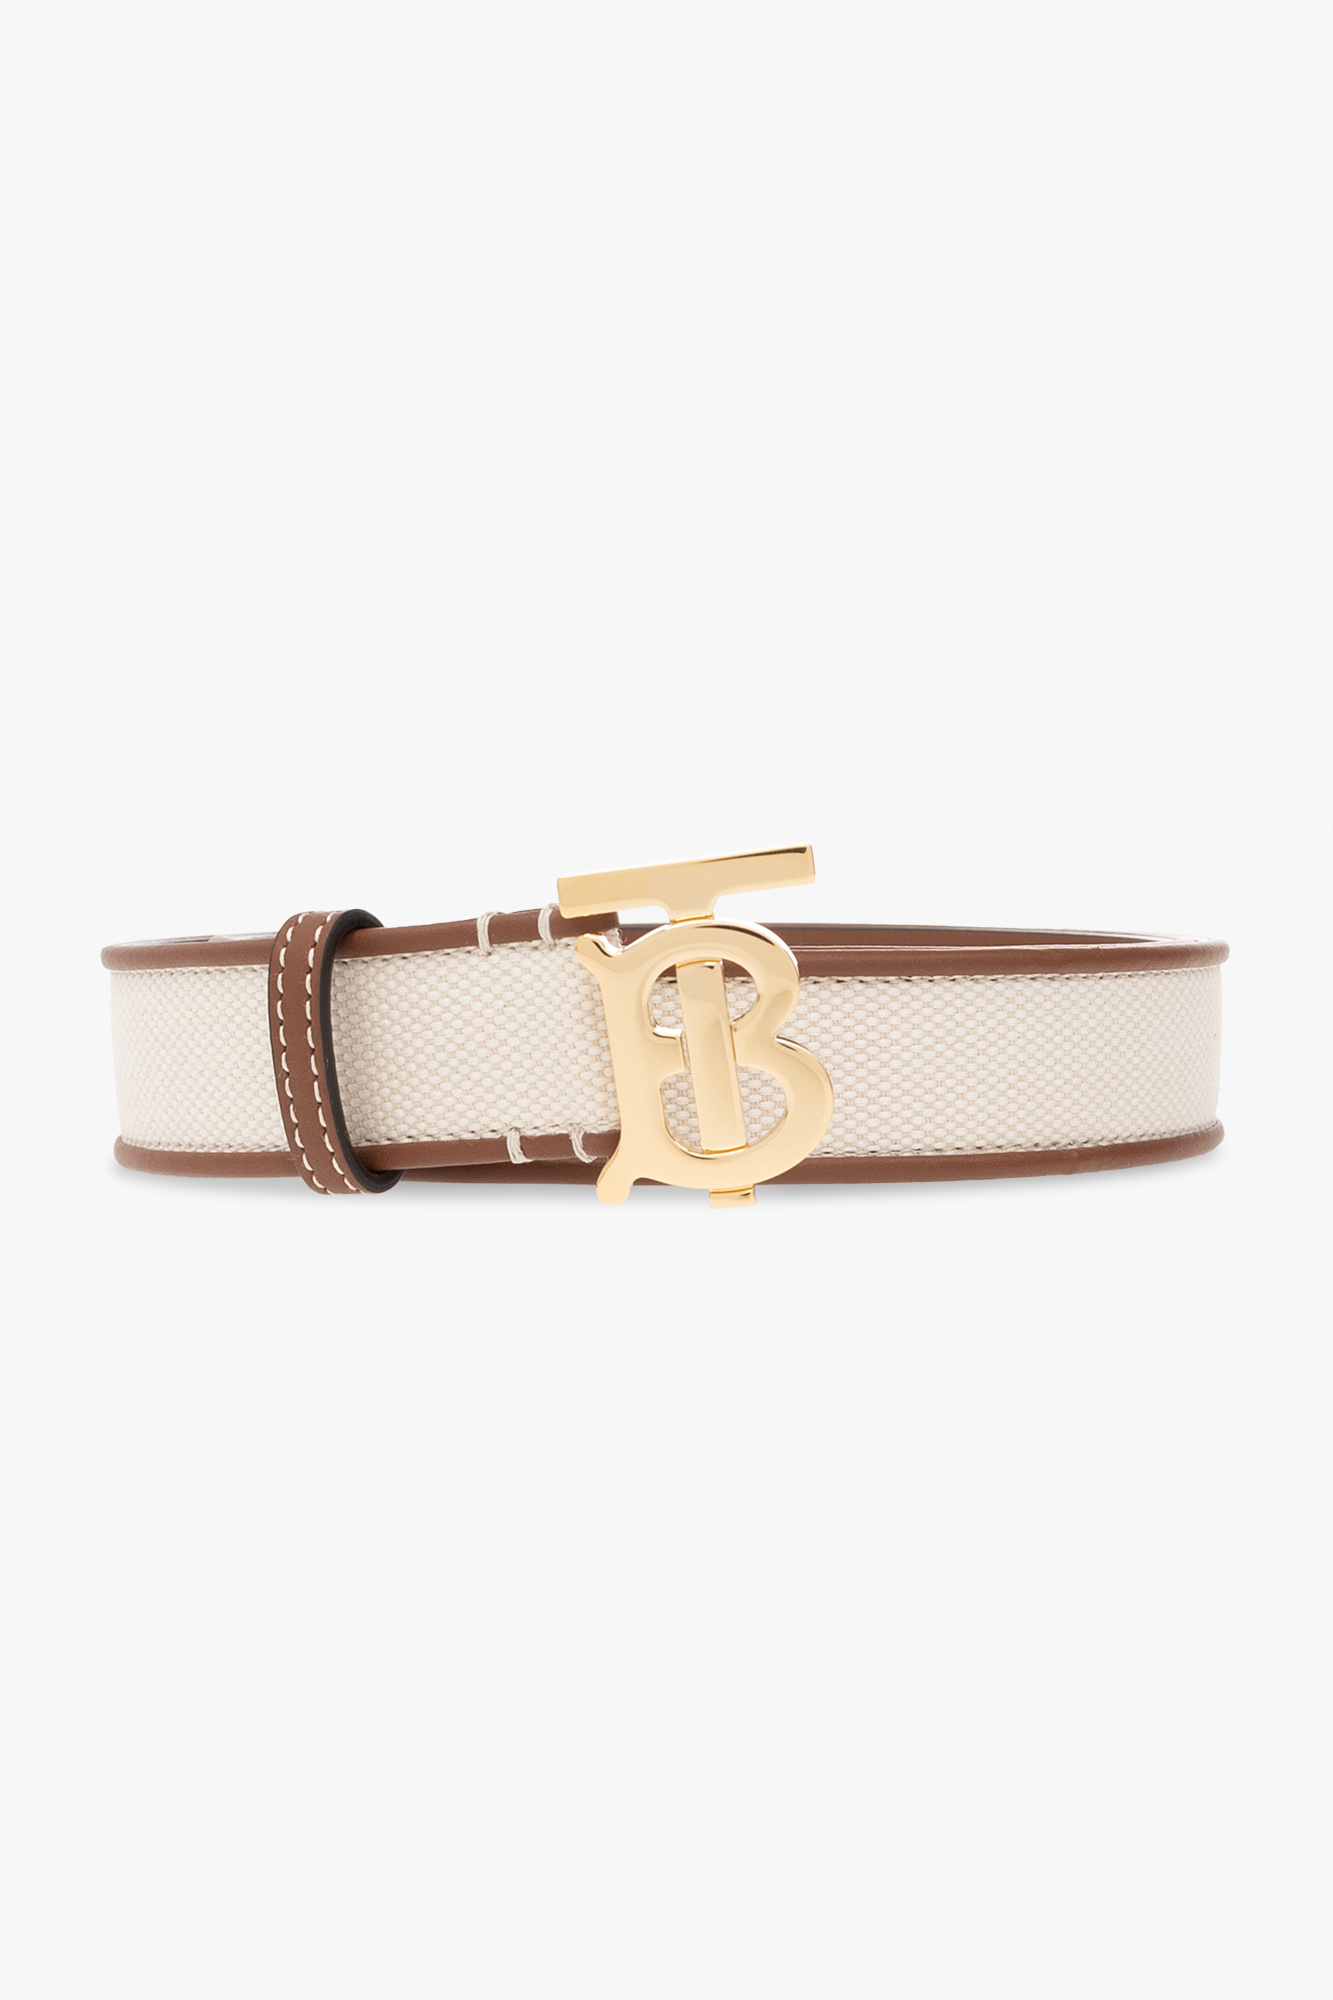 Canvas and Leather TB Belt in White/tan/gold - Women